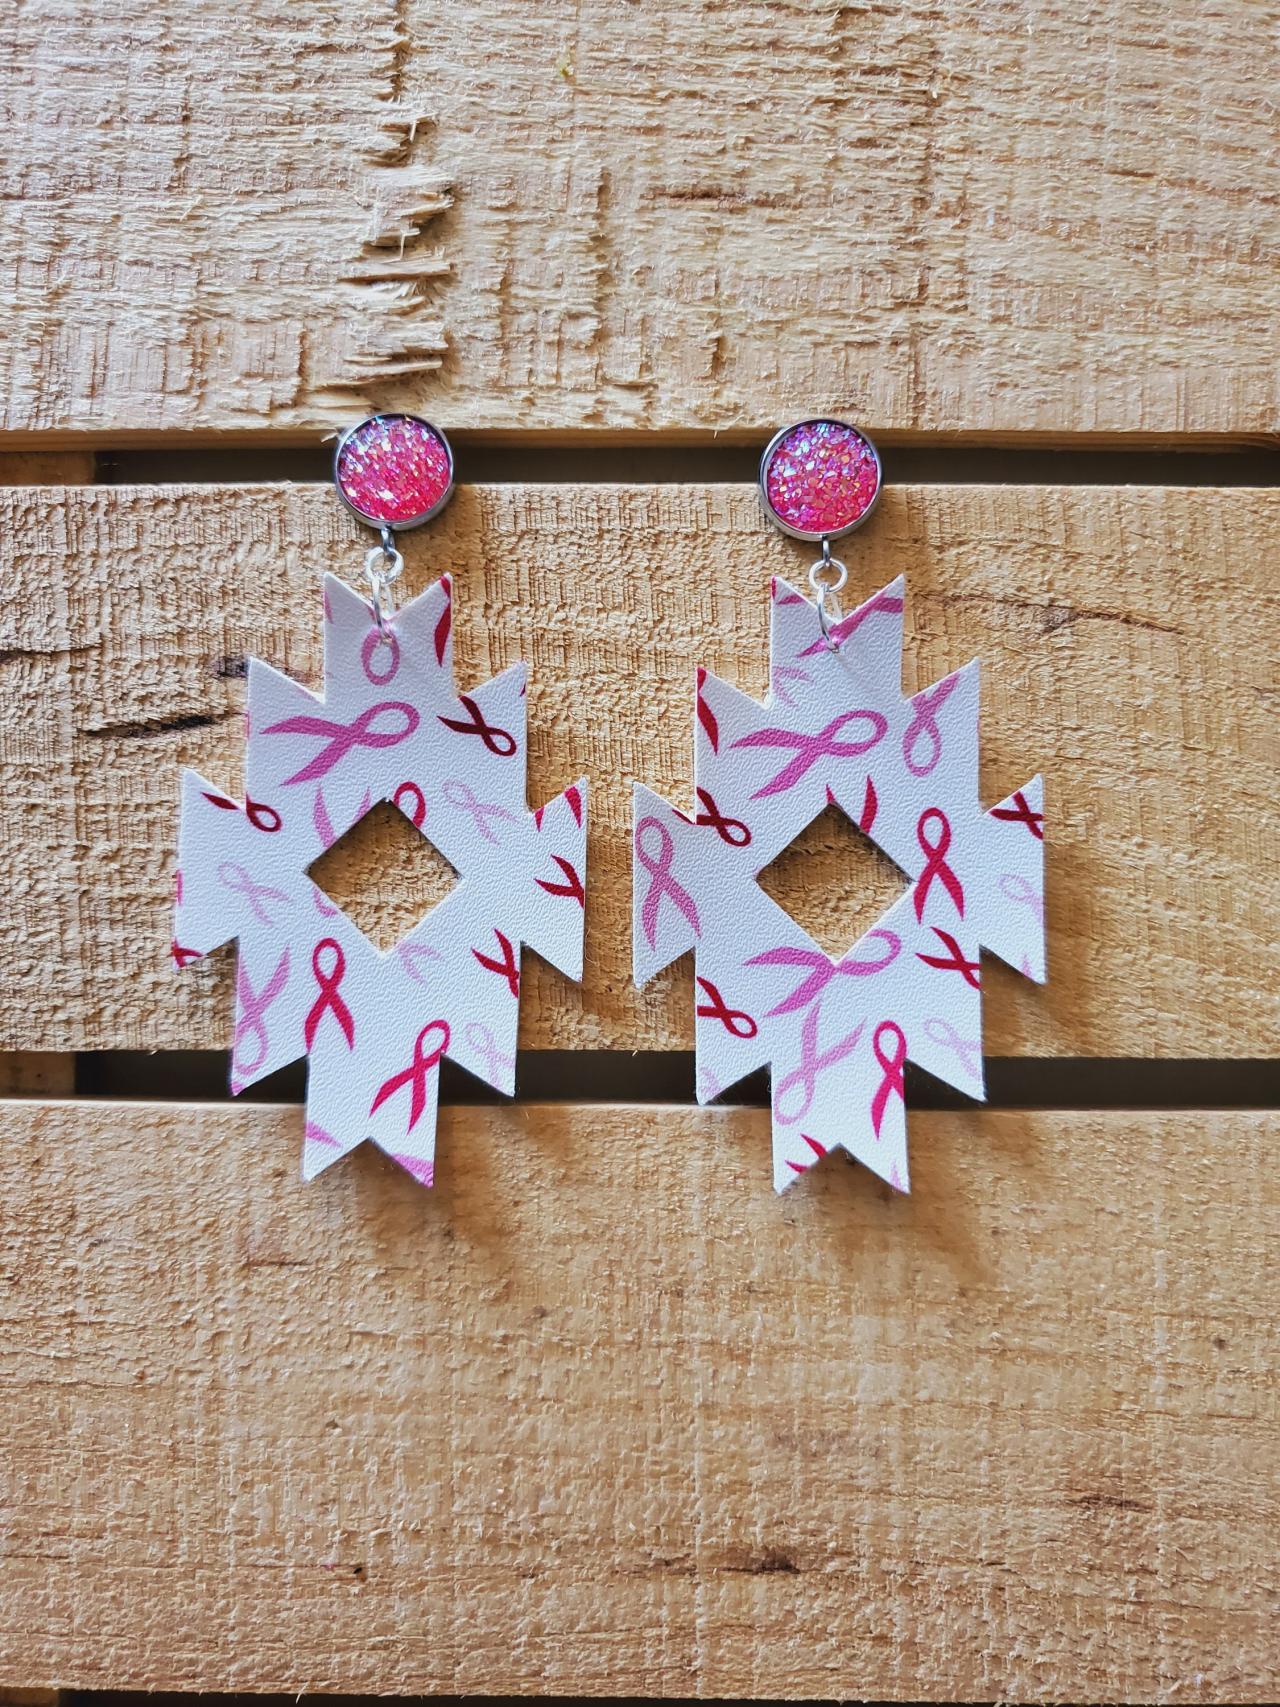 Breast Cancer Awareness Leather Earrings, Aztec Leather Earrings, October Earrings, Sparkle Earrings, Pink And White Earrings, Gift For Her